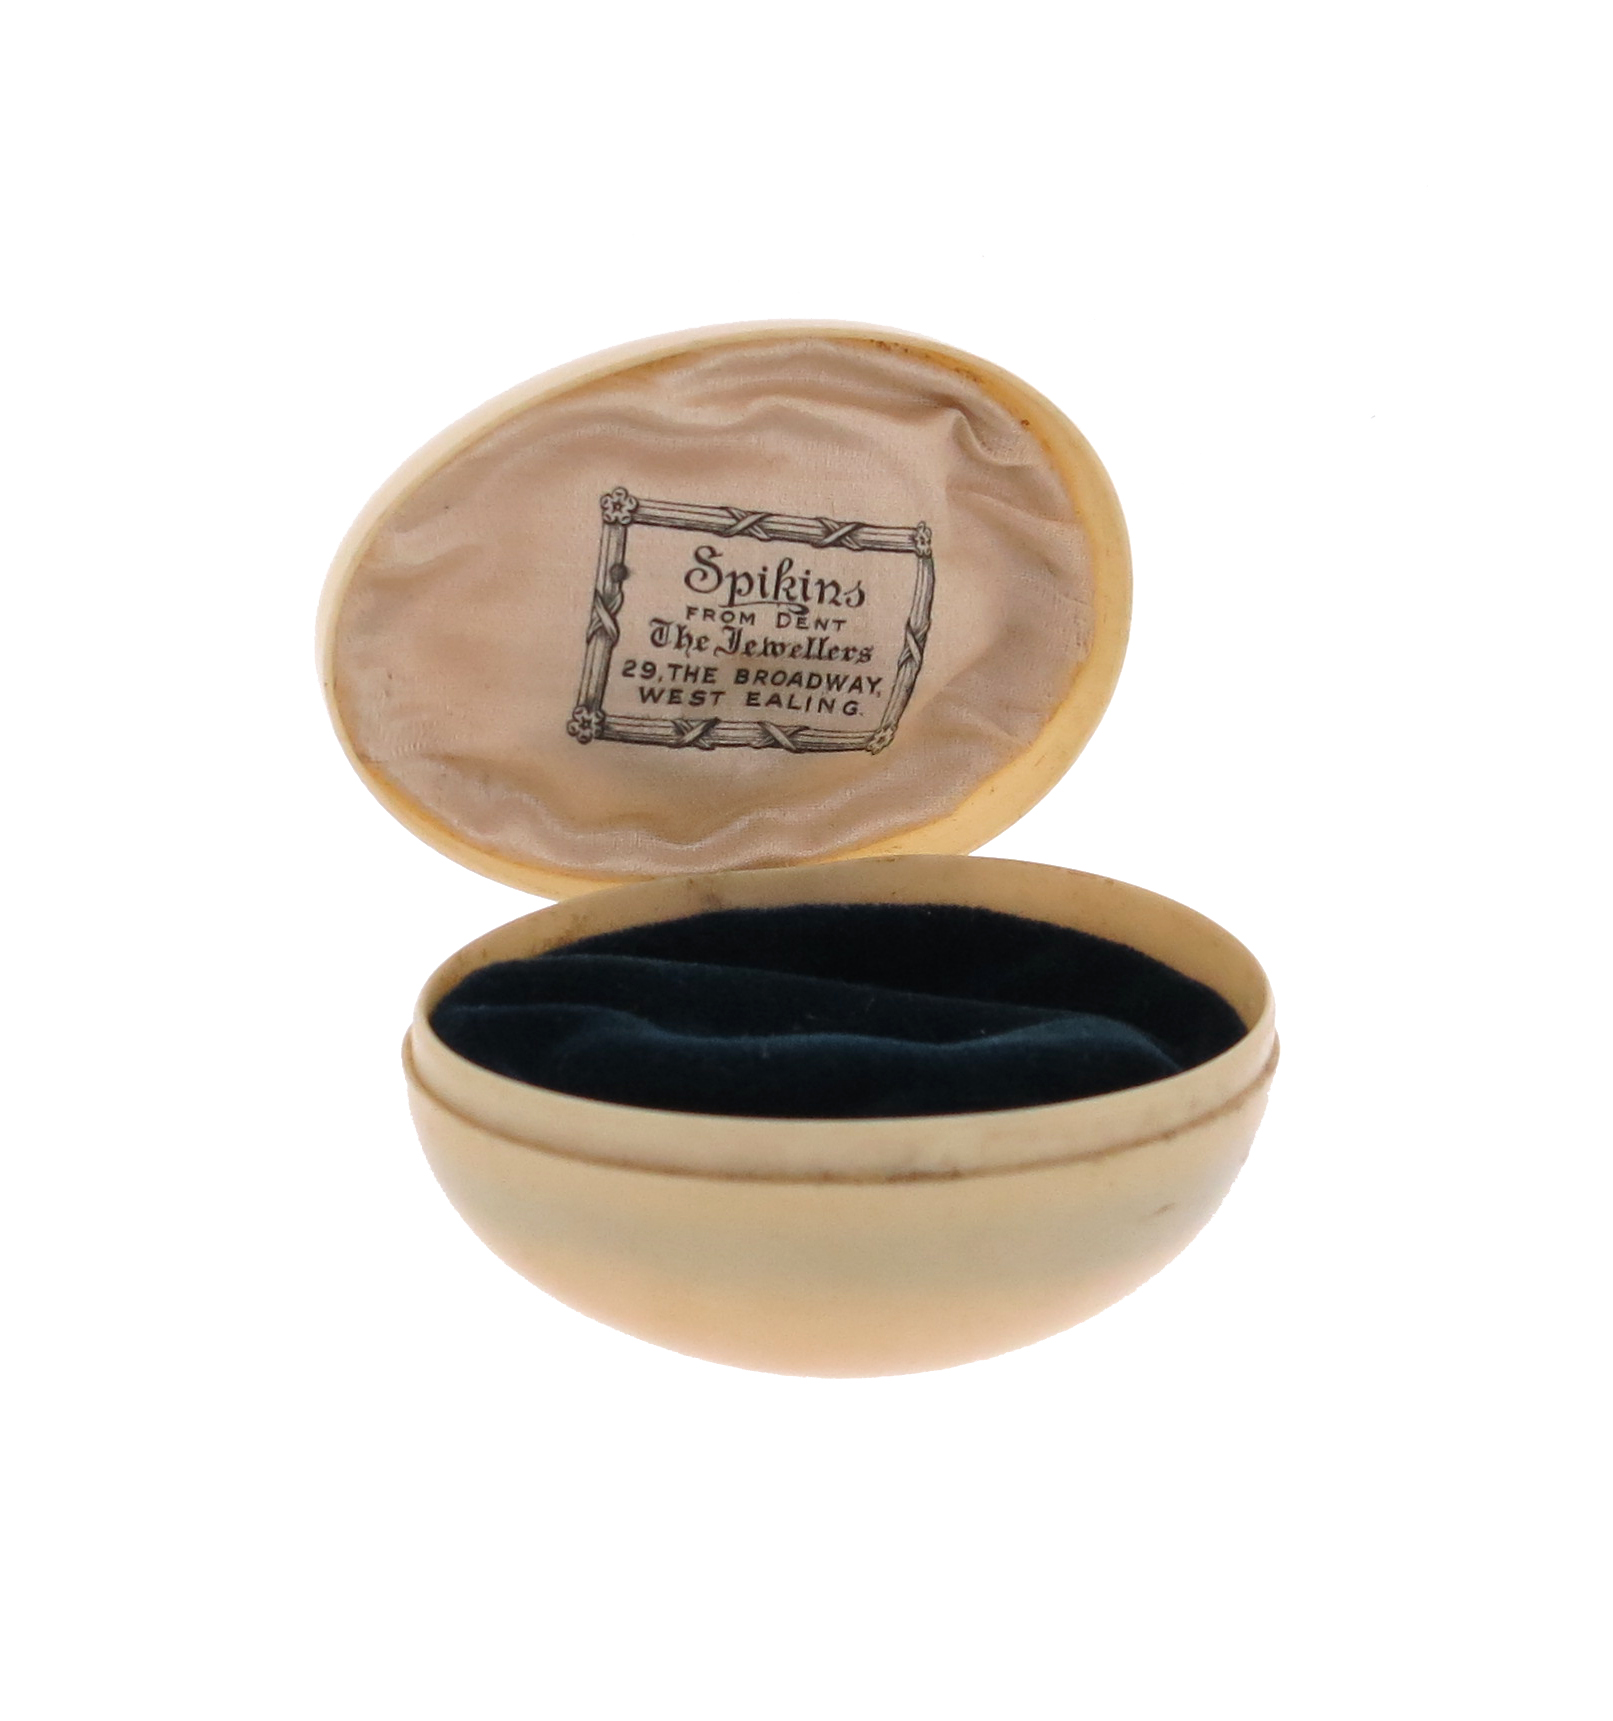 An unusual egg-shaped ivorine hinged case, the interior silk inscribed 'Spinkins from Dent', 6 x 4c